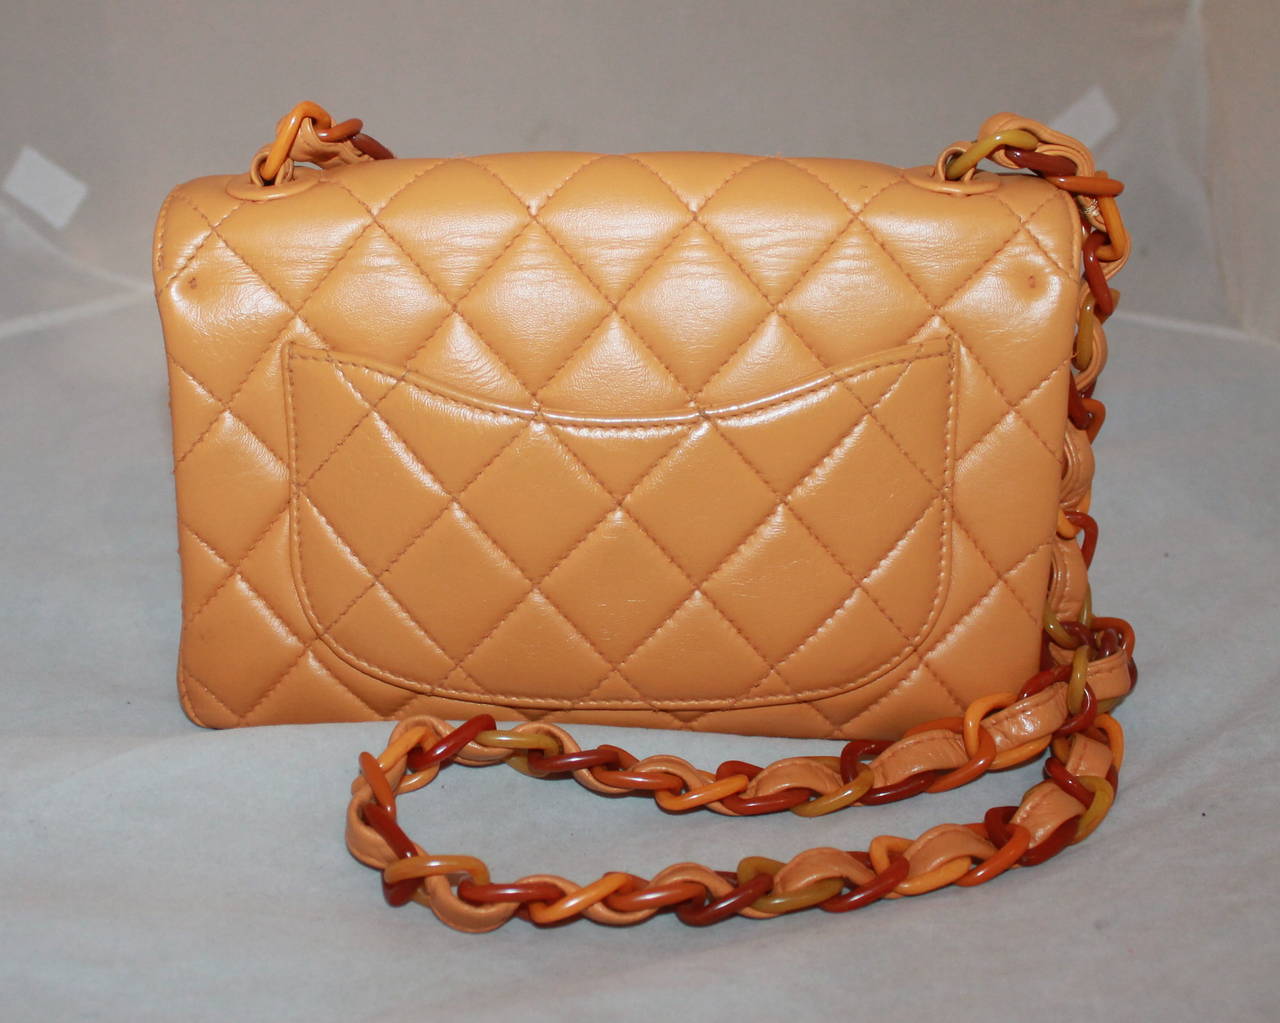 Chanel Vintage Mustard Lambkin Quilted Handbag with Bakelite Chain - circa 1998. This handbag is in very good vintage condition. 

Measurements:
Length- 6.75